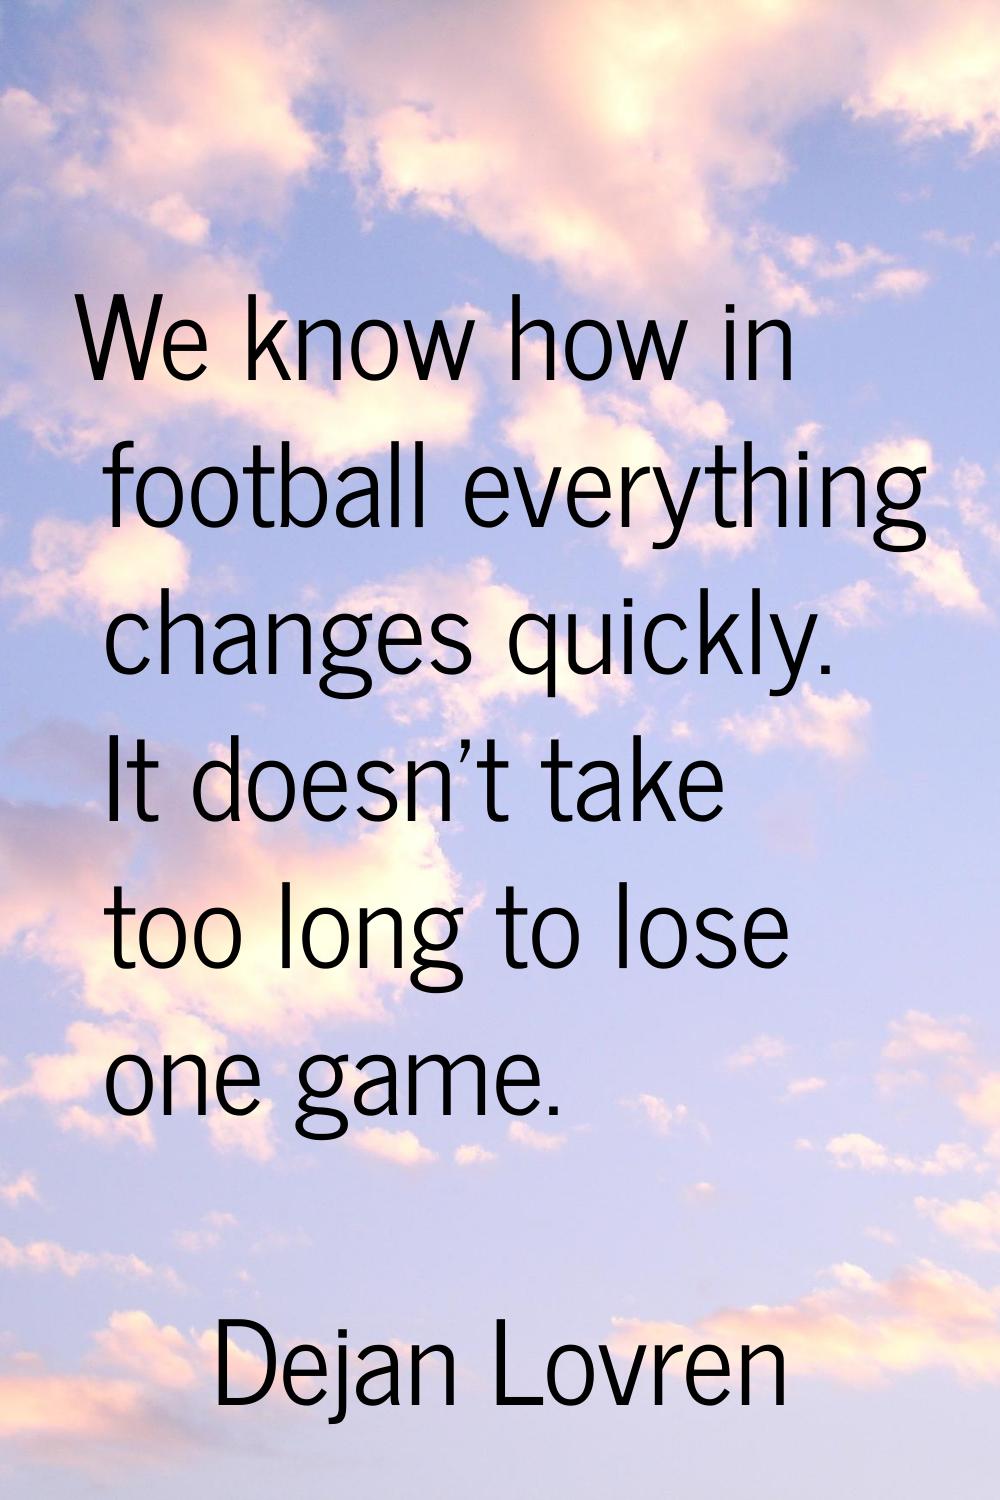 We know how in football everything changes quickly. It doesn't take too long to lose one game.